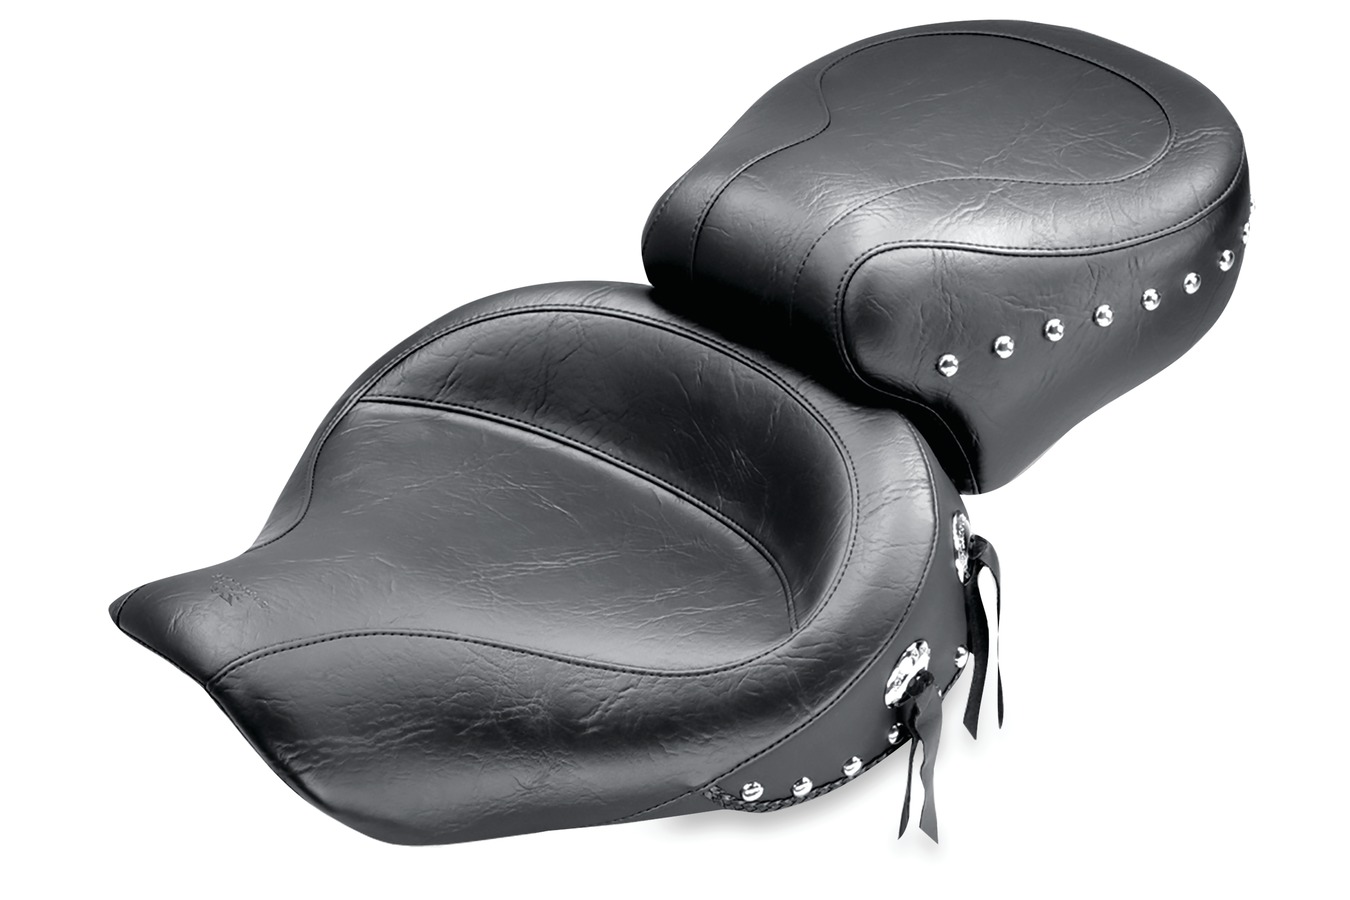 Wide Touring One-Piece Seat for Harley-Davidson Dyna 1991-